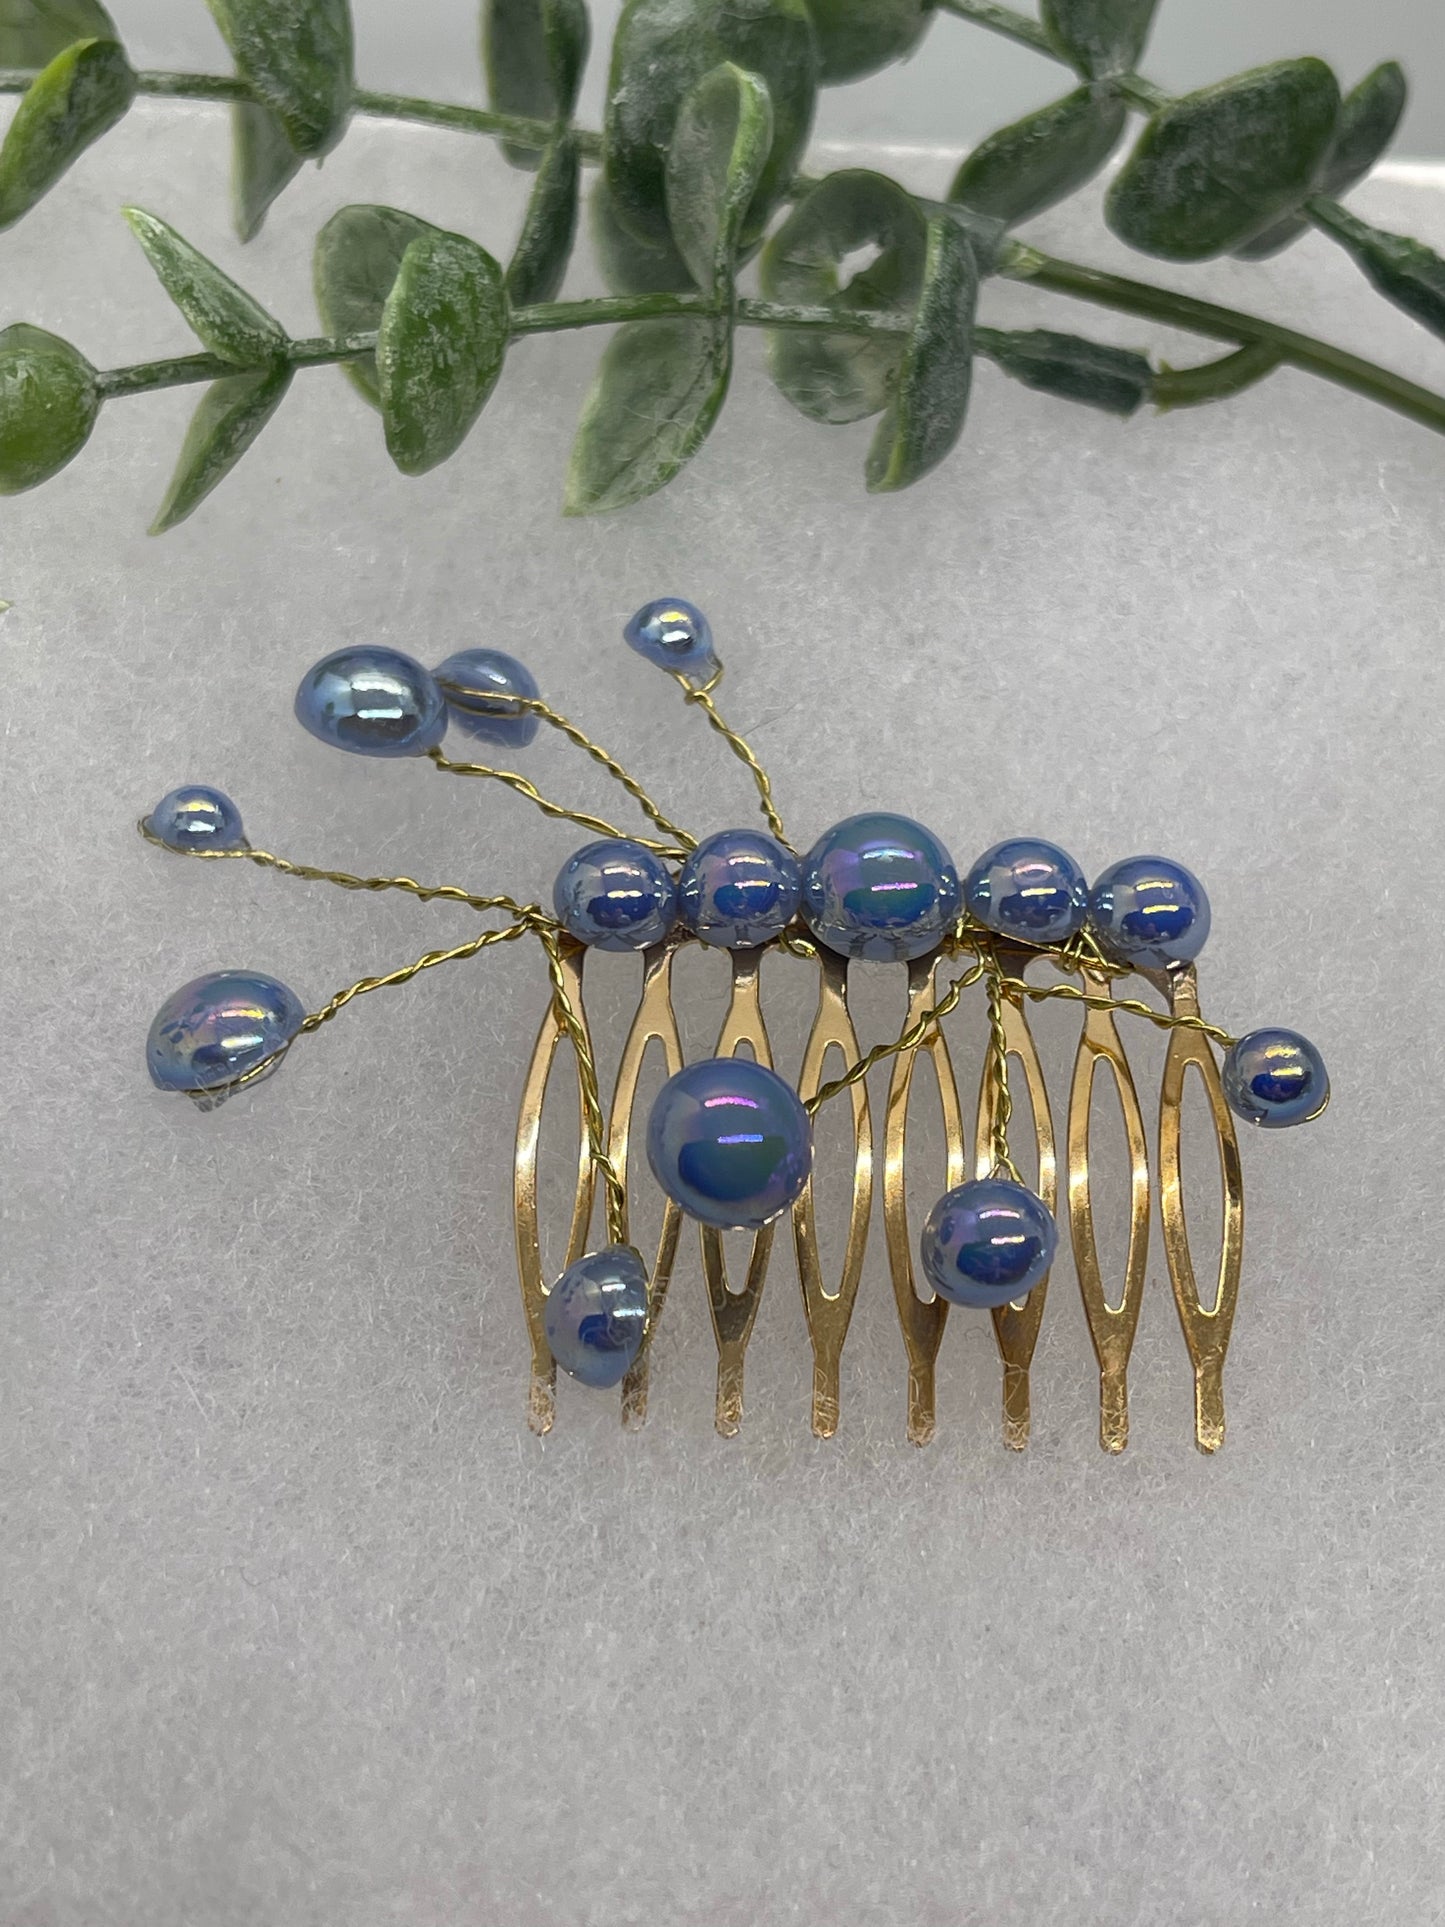 Blue faux Pearl 2.0” gold tone bridal side Comb accents vine handmade by hairdazzzel wedding accessory bride